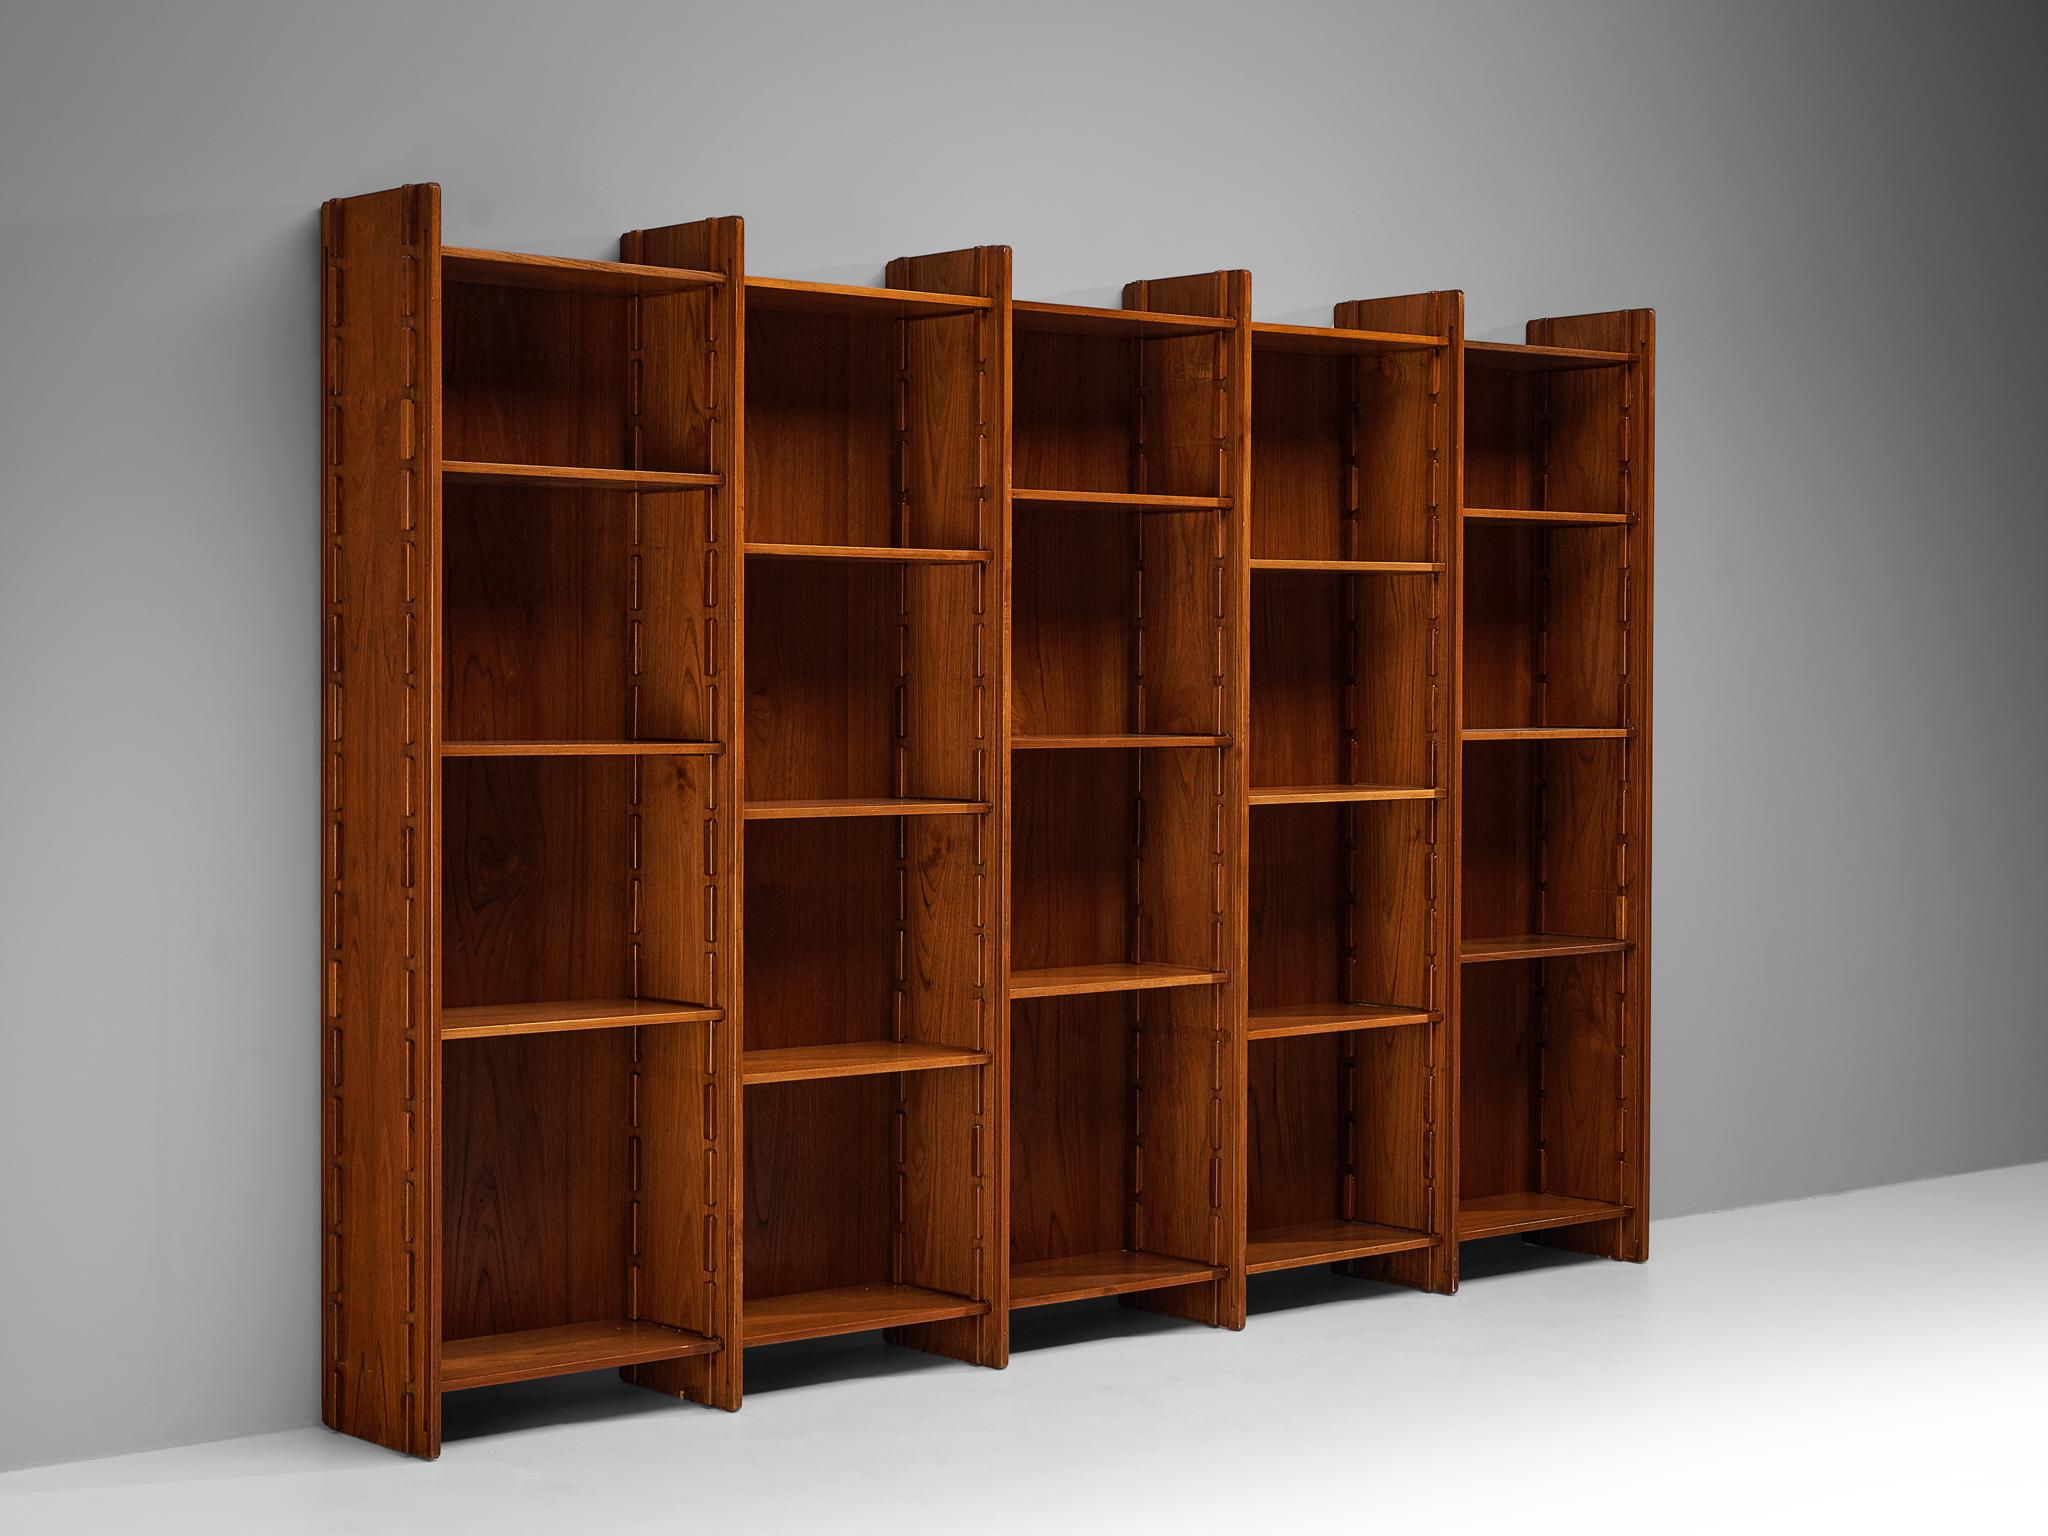 Gianfranco Frattini for Bernini, bookcase / wall unit, model '540', teak, Italy, 1960

This library unit is designed by Italian designer Gianfranco Frattini and offers plenty of storage space. The sophisticated composition is based on five vertical